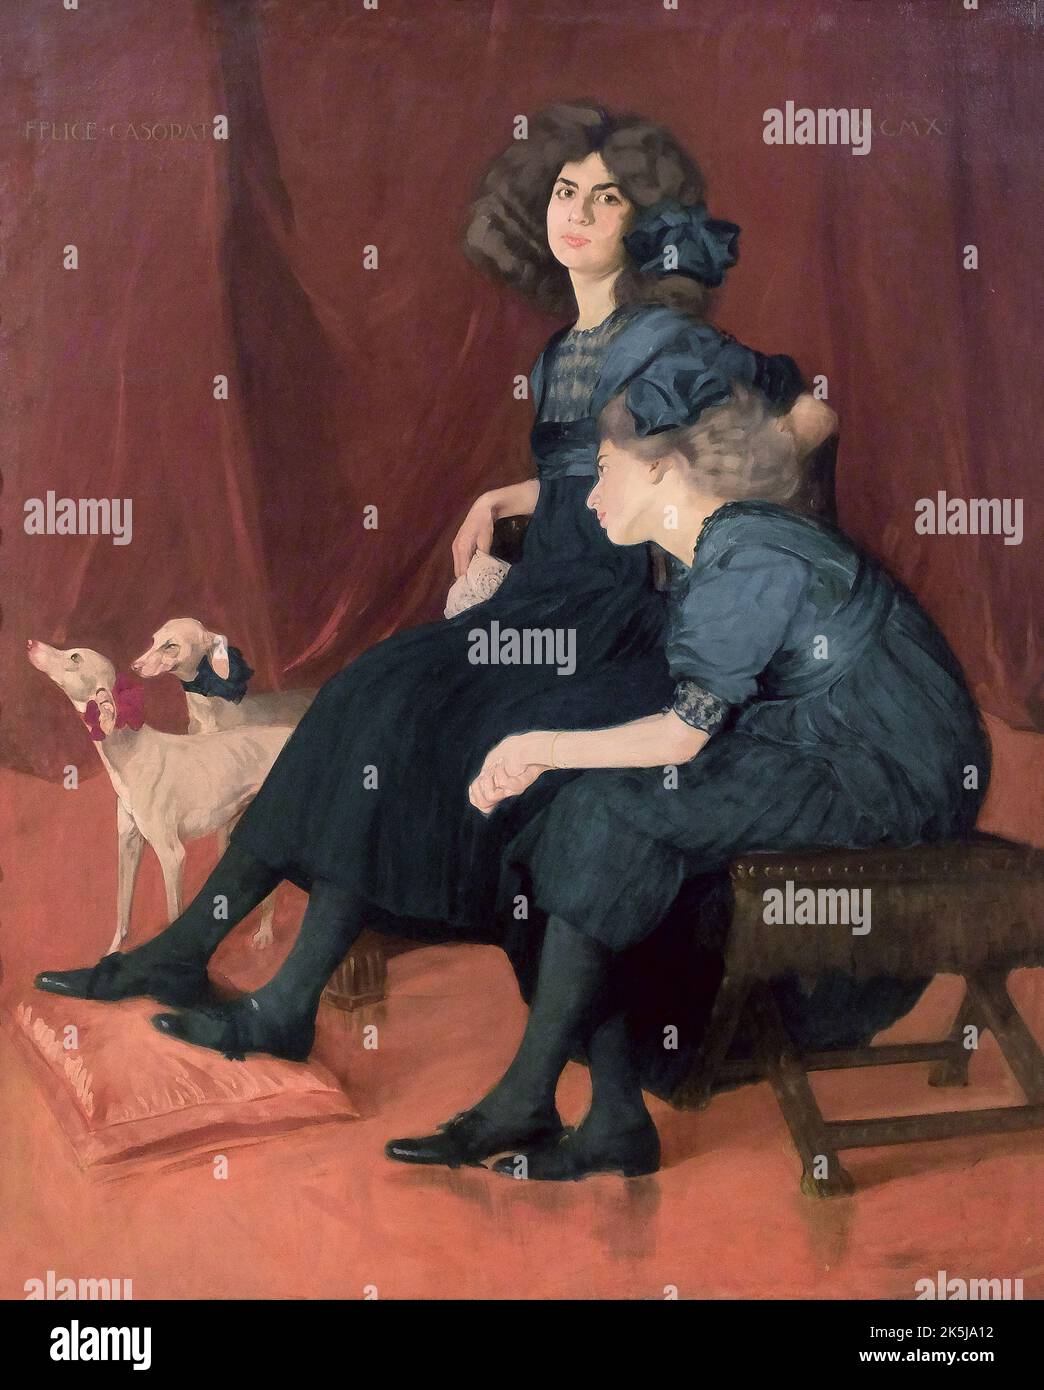 Le ereditiere - Le sorelle (The heiresses - The sisters) (1910) by Felice Casorati (1883-1963). Oil on canvas, 150x120 cm. Mart museum, Rovereto, Ital Stock Photo